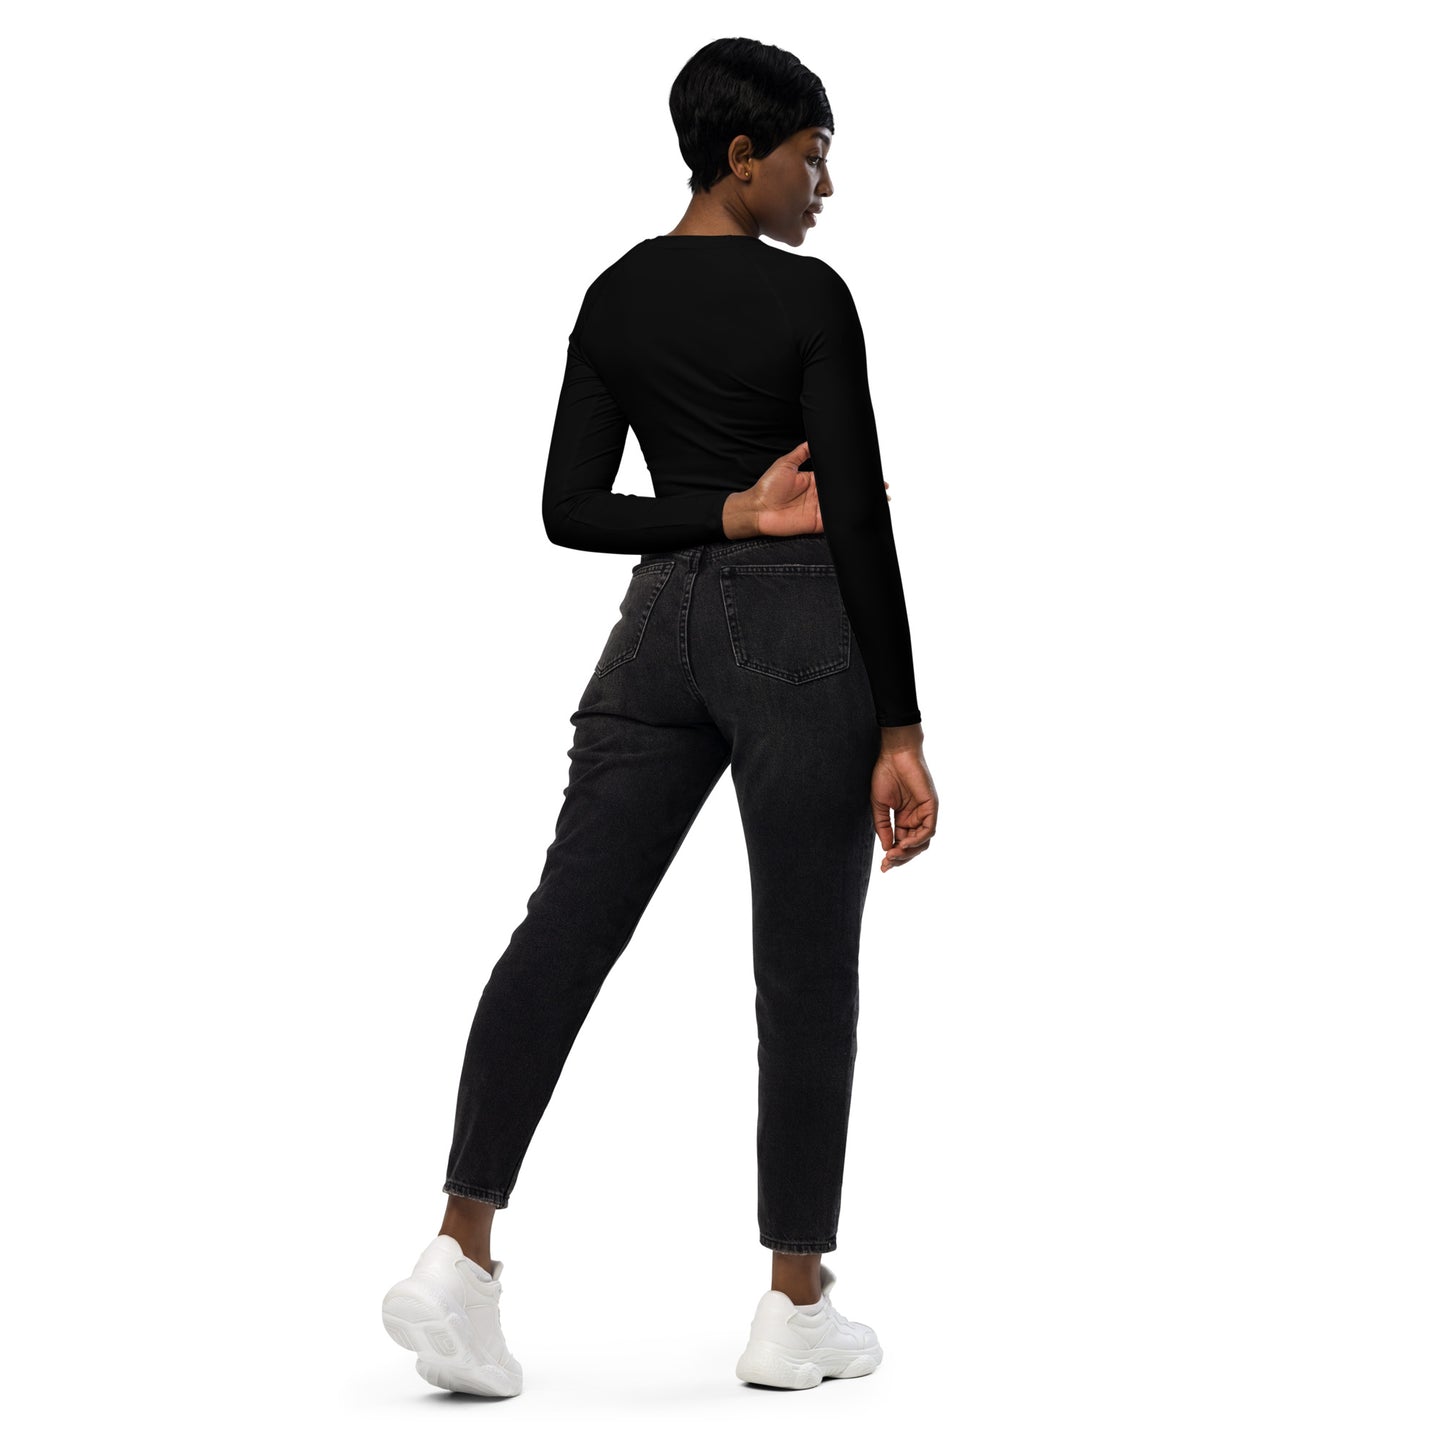 UPF 50+ Recycled long-sleeve crop top